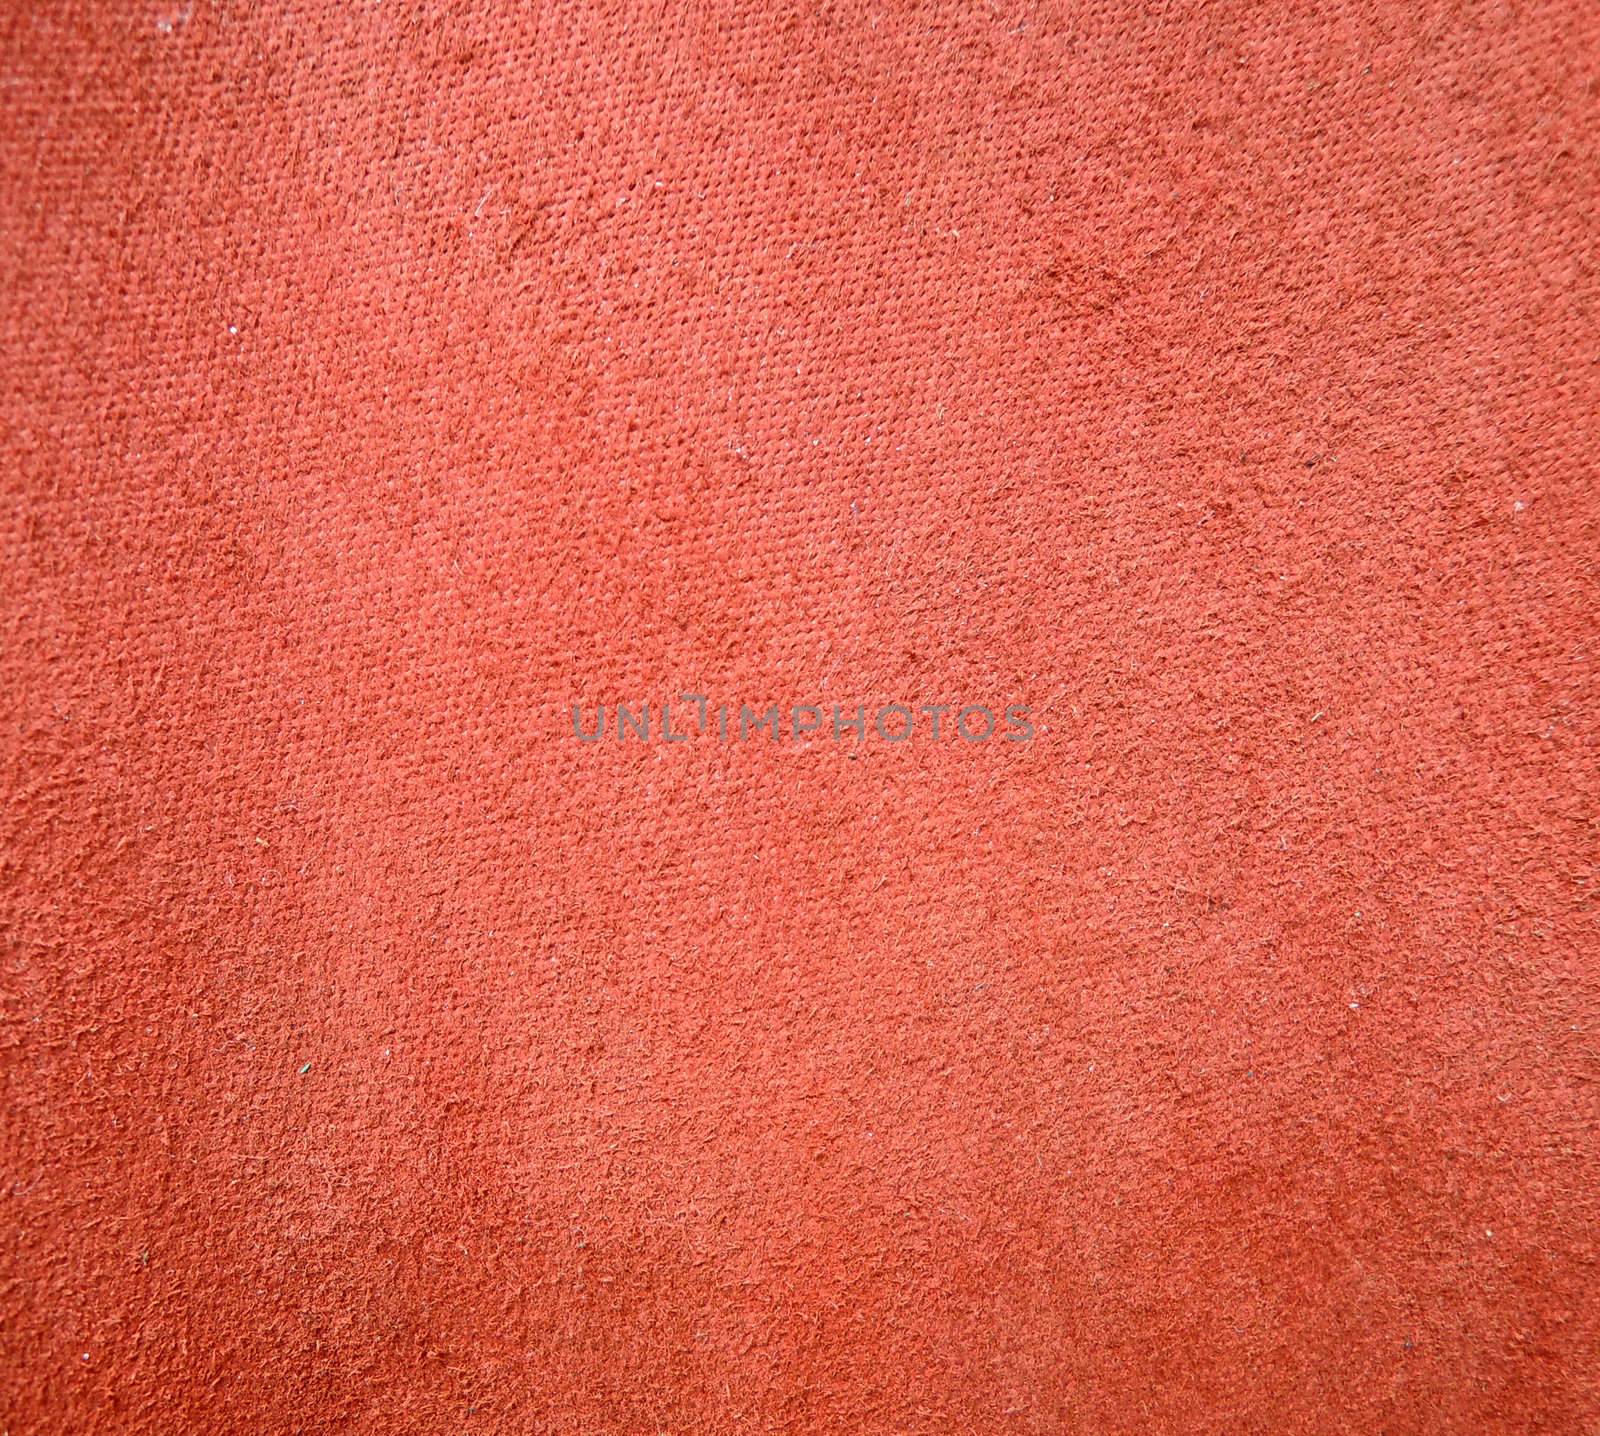 Red inside skin texture